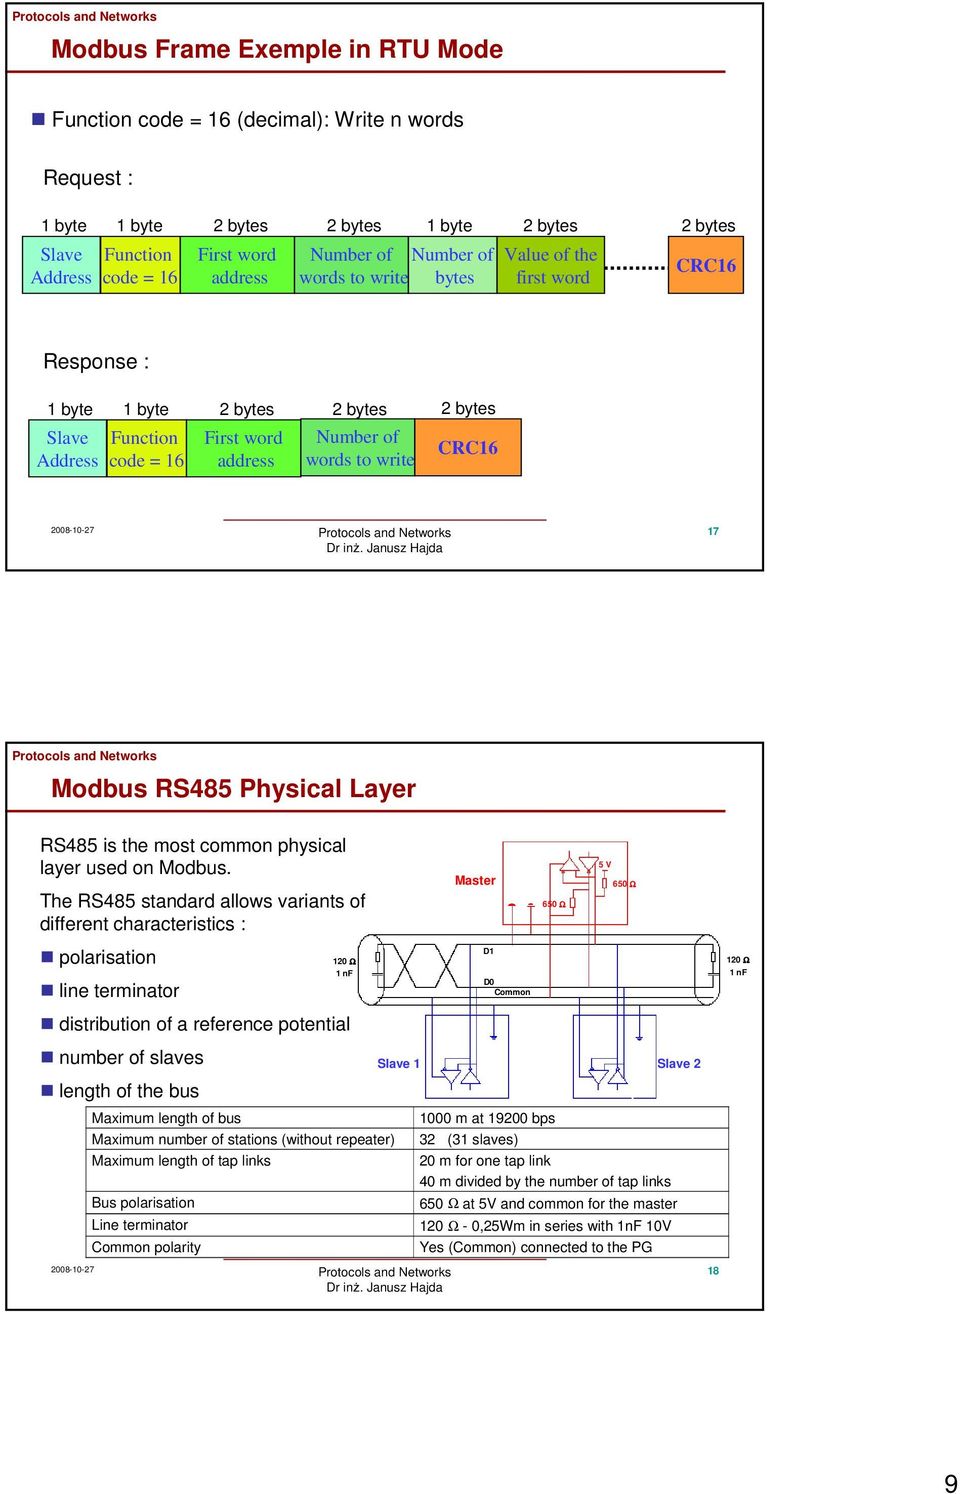 RS485 is the most common physical layer used on Modbus.